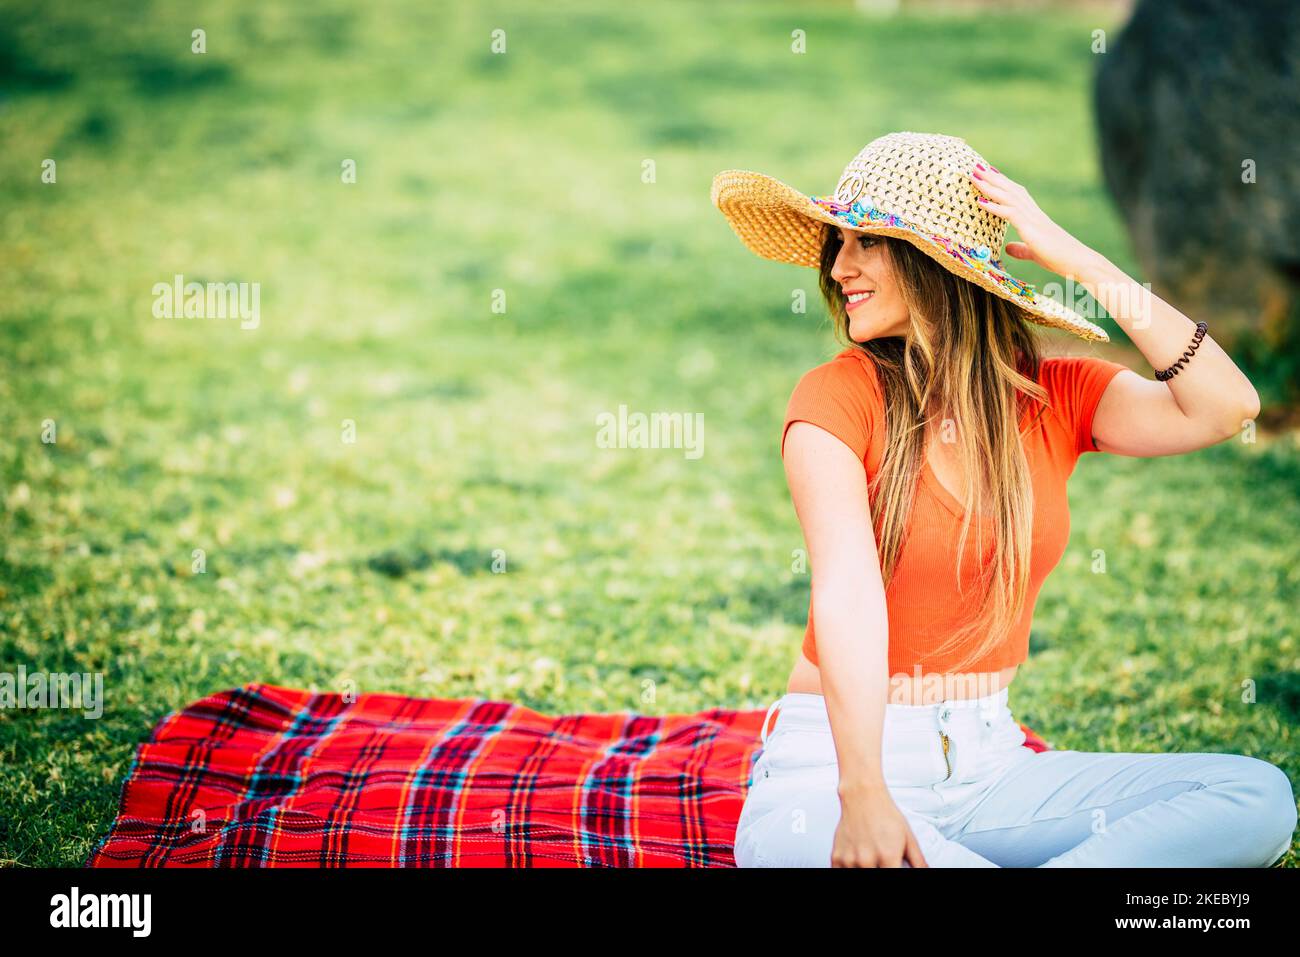 Portrait of trendy young female relaxing sitting on a red cover in a meadow field wearing straw hat enjoying time and the green nature. Concept of alone leisure serene outdoors activity at the park Stock Photo